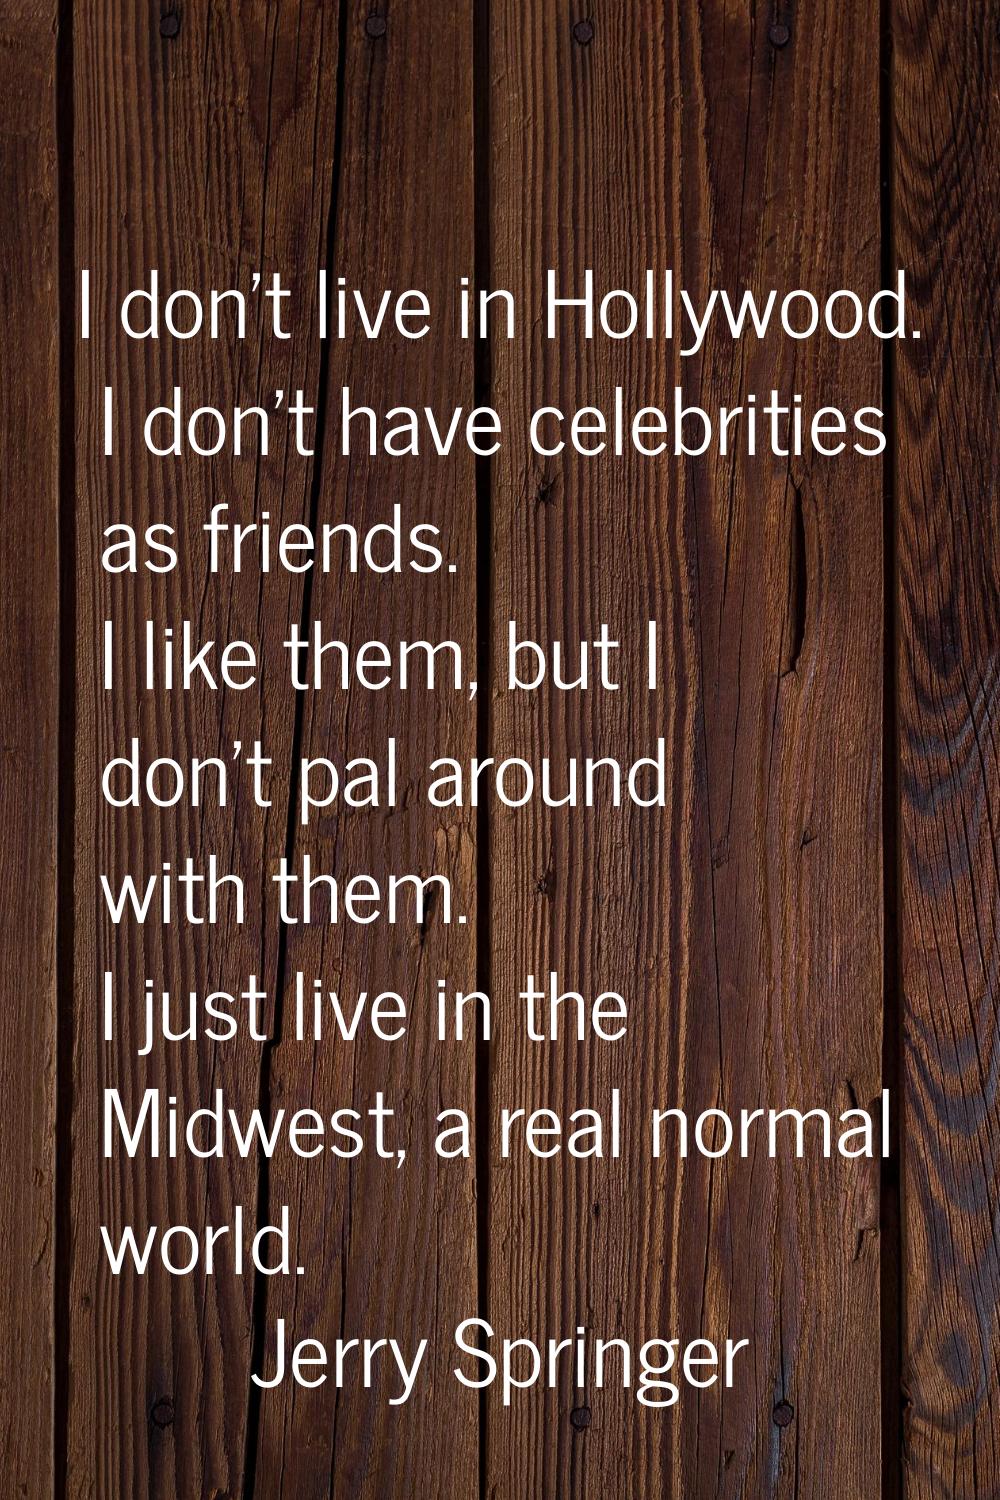 I don't live in Hollywood. I don't have celebrities as friends. I like them, but I don't pal around